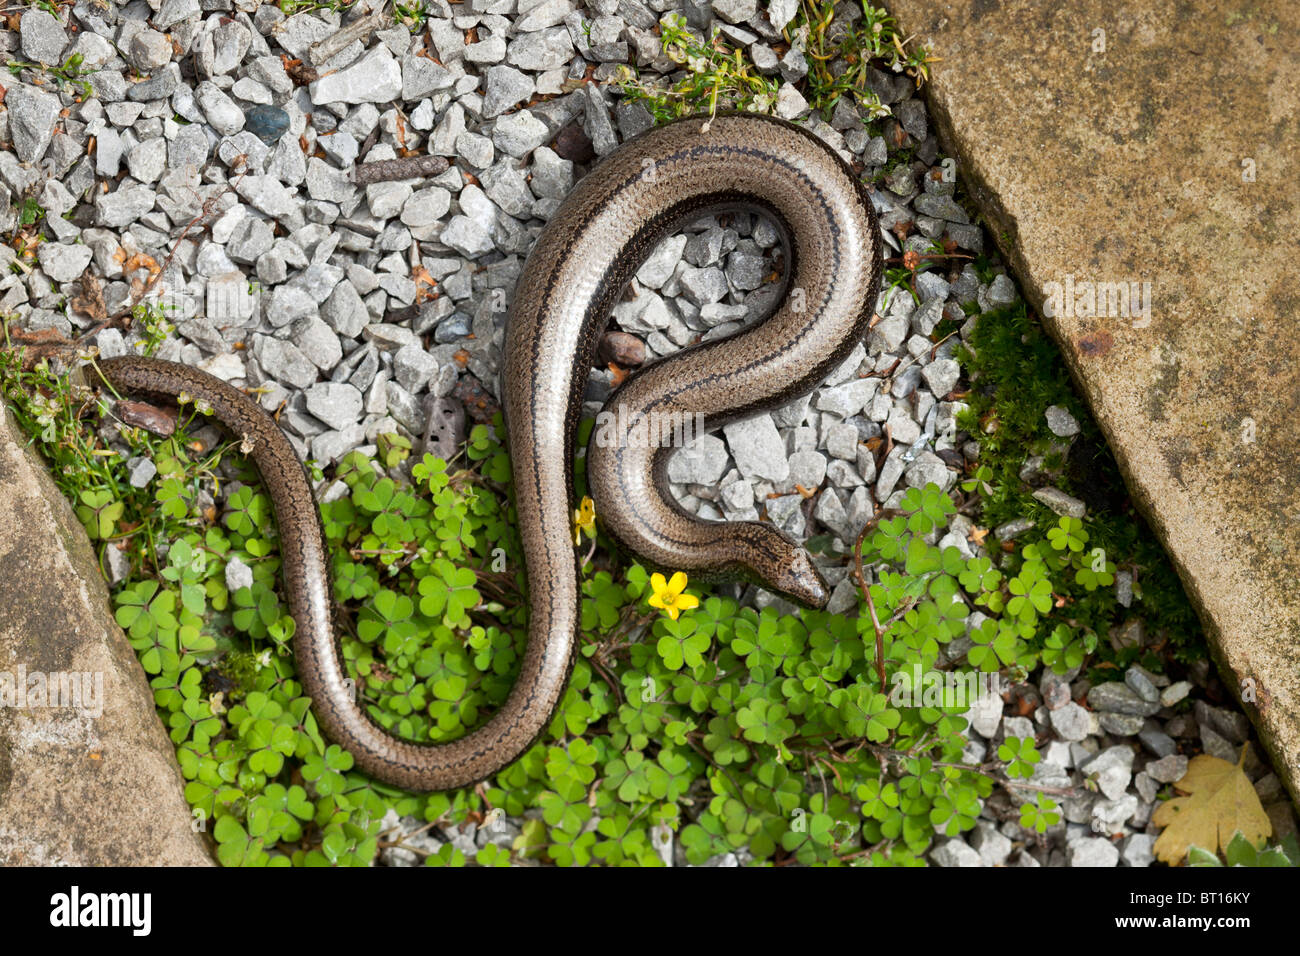 Slow-worm, Anguis fragilis, pregnant female with partially re-grown tail. Wales. Stock Photo